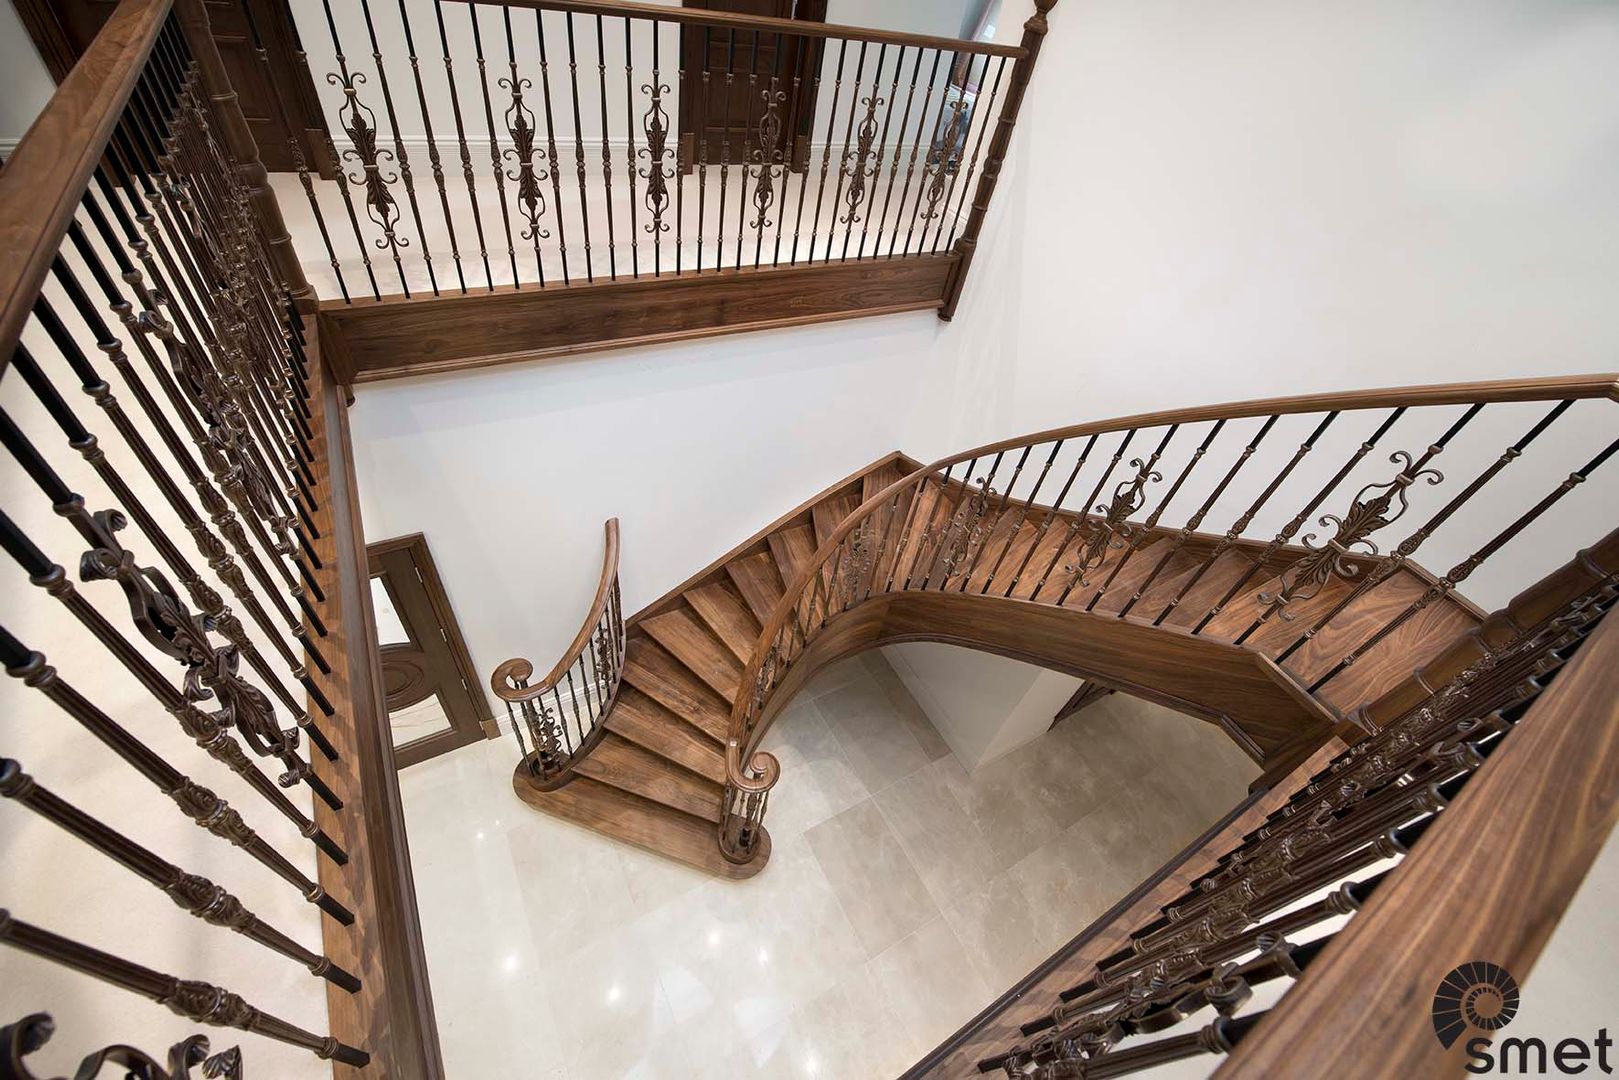 Iver Smet UK - Staircases راهرو سبک کلاسیک، راهرو و پله American Walnut,Wrought Iron,Curved,Design,Staircase,Bespoke